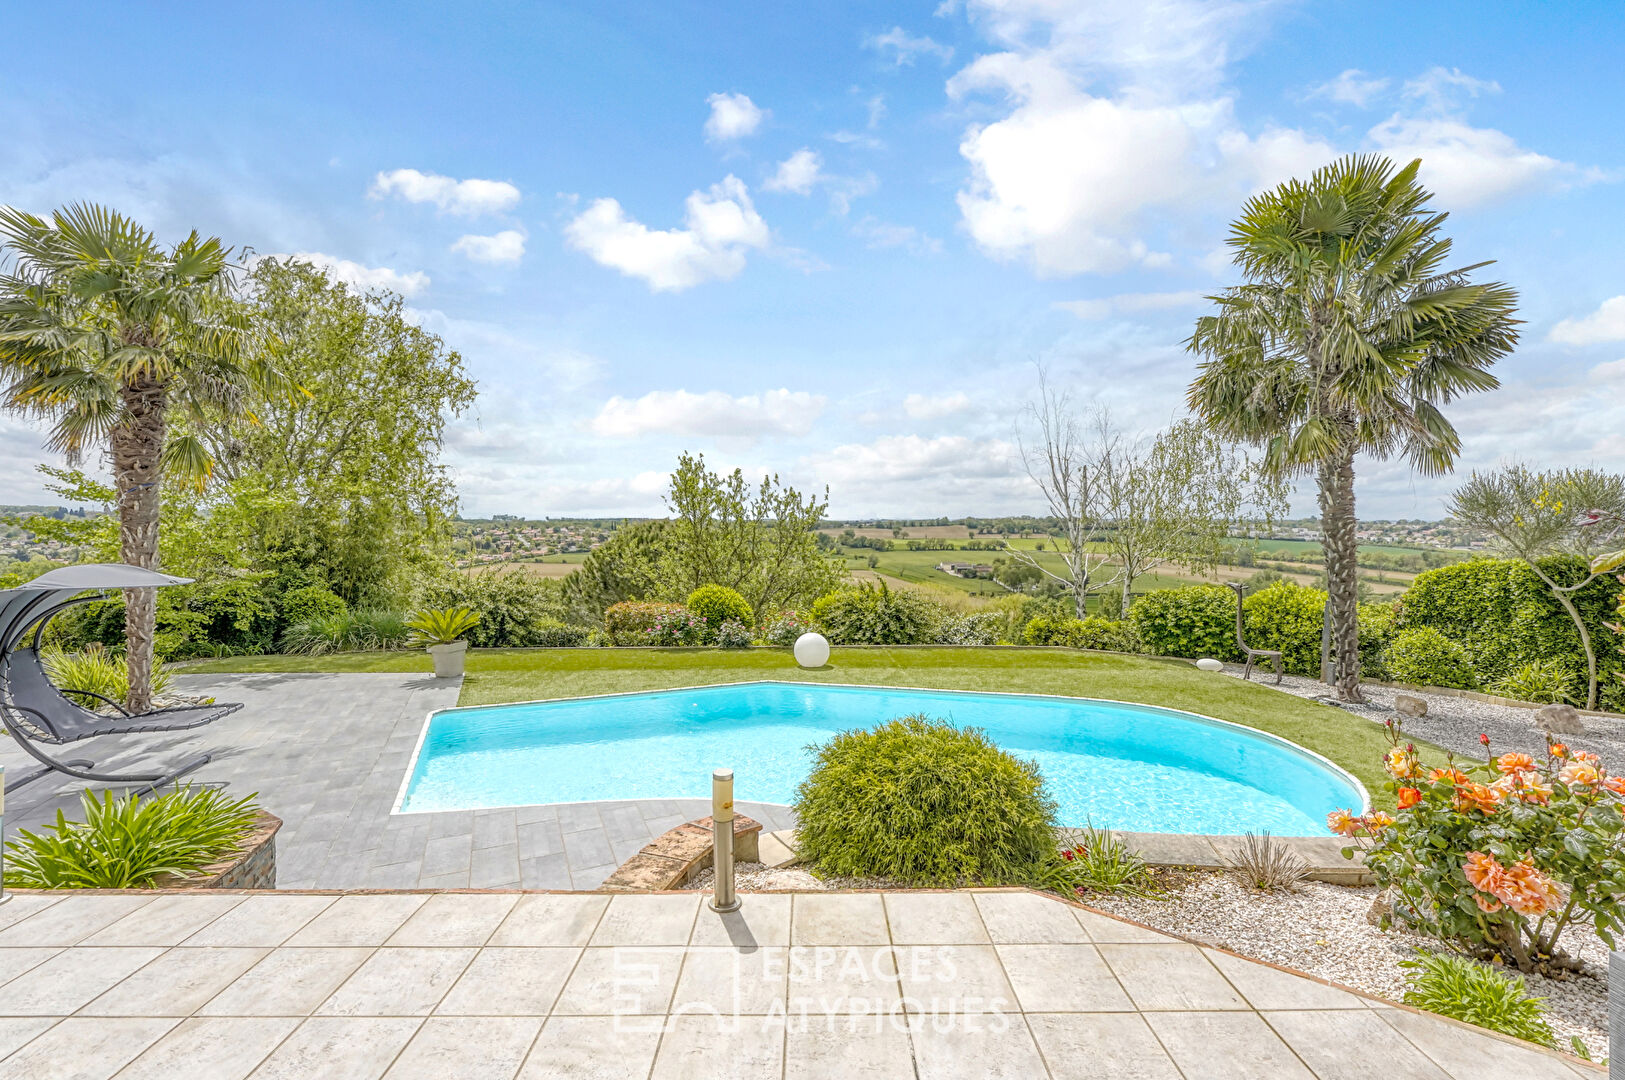 Villa with swimming pool and Pyrenees view in Lauzerville